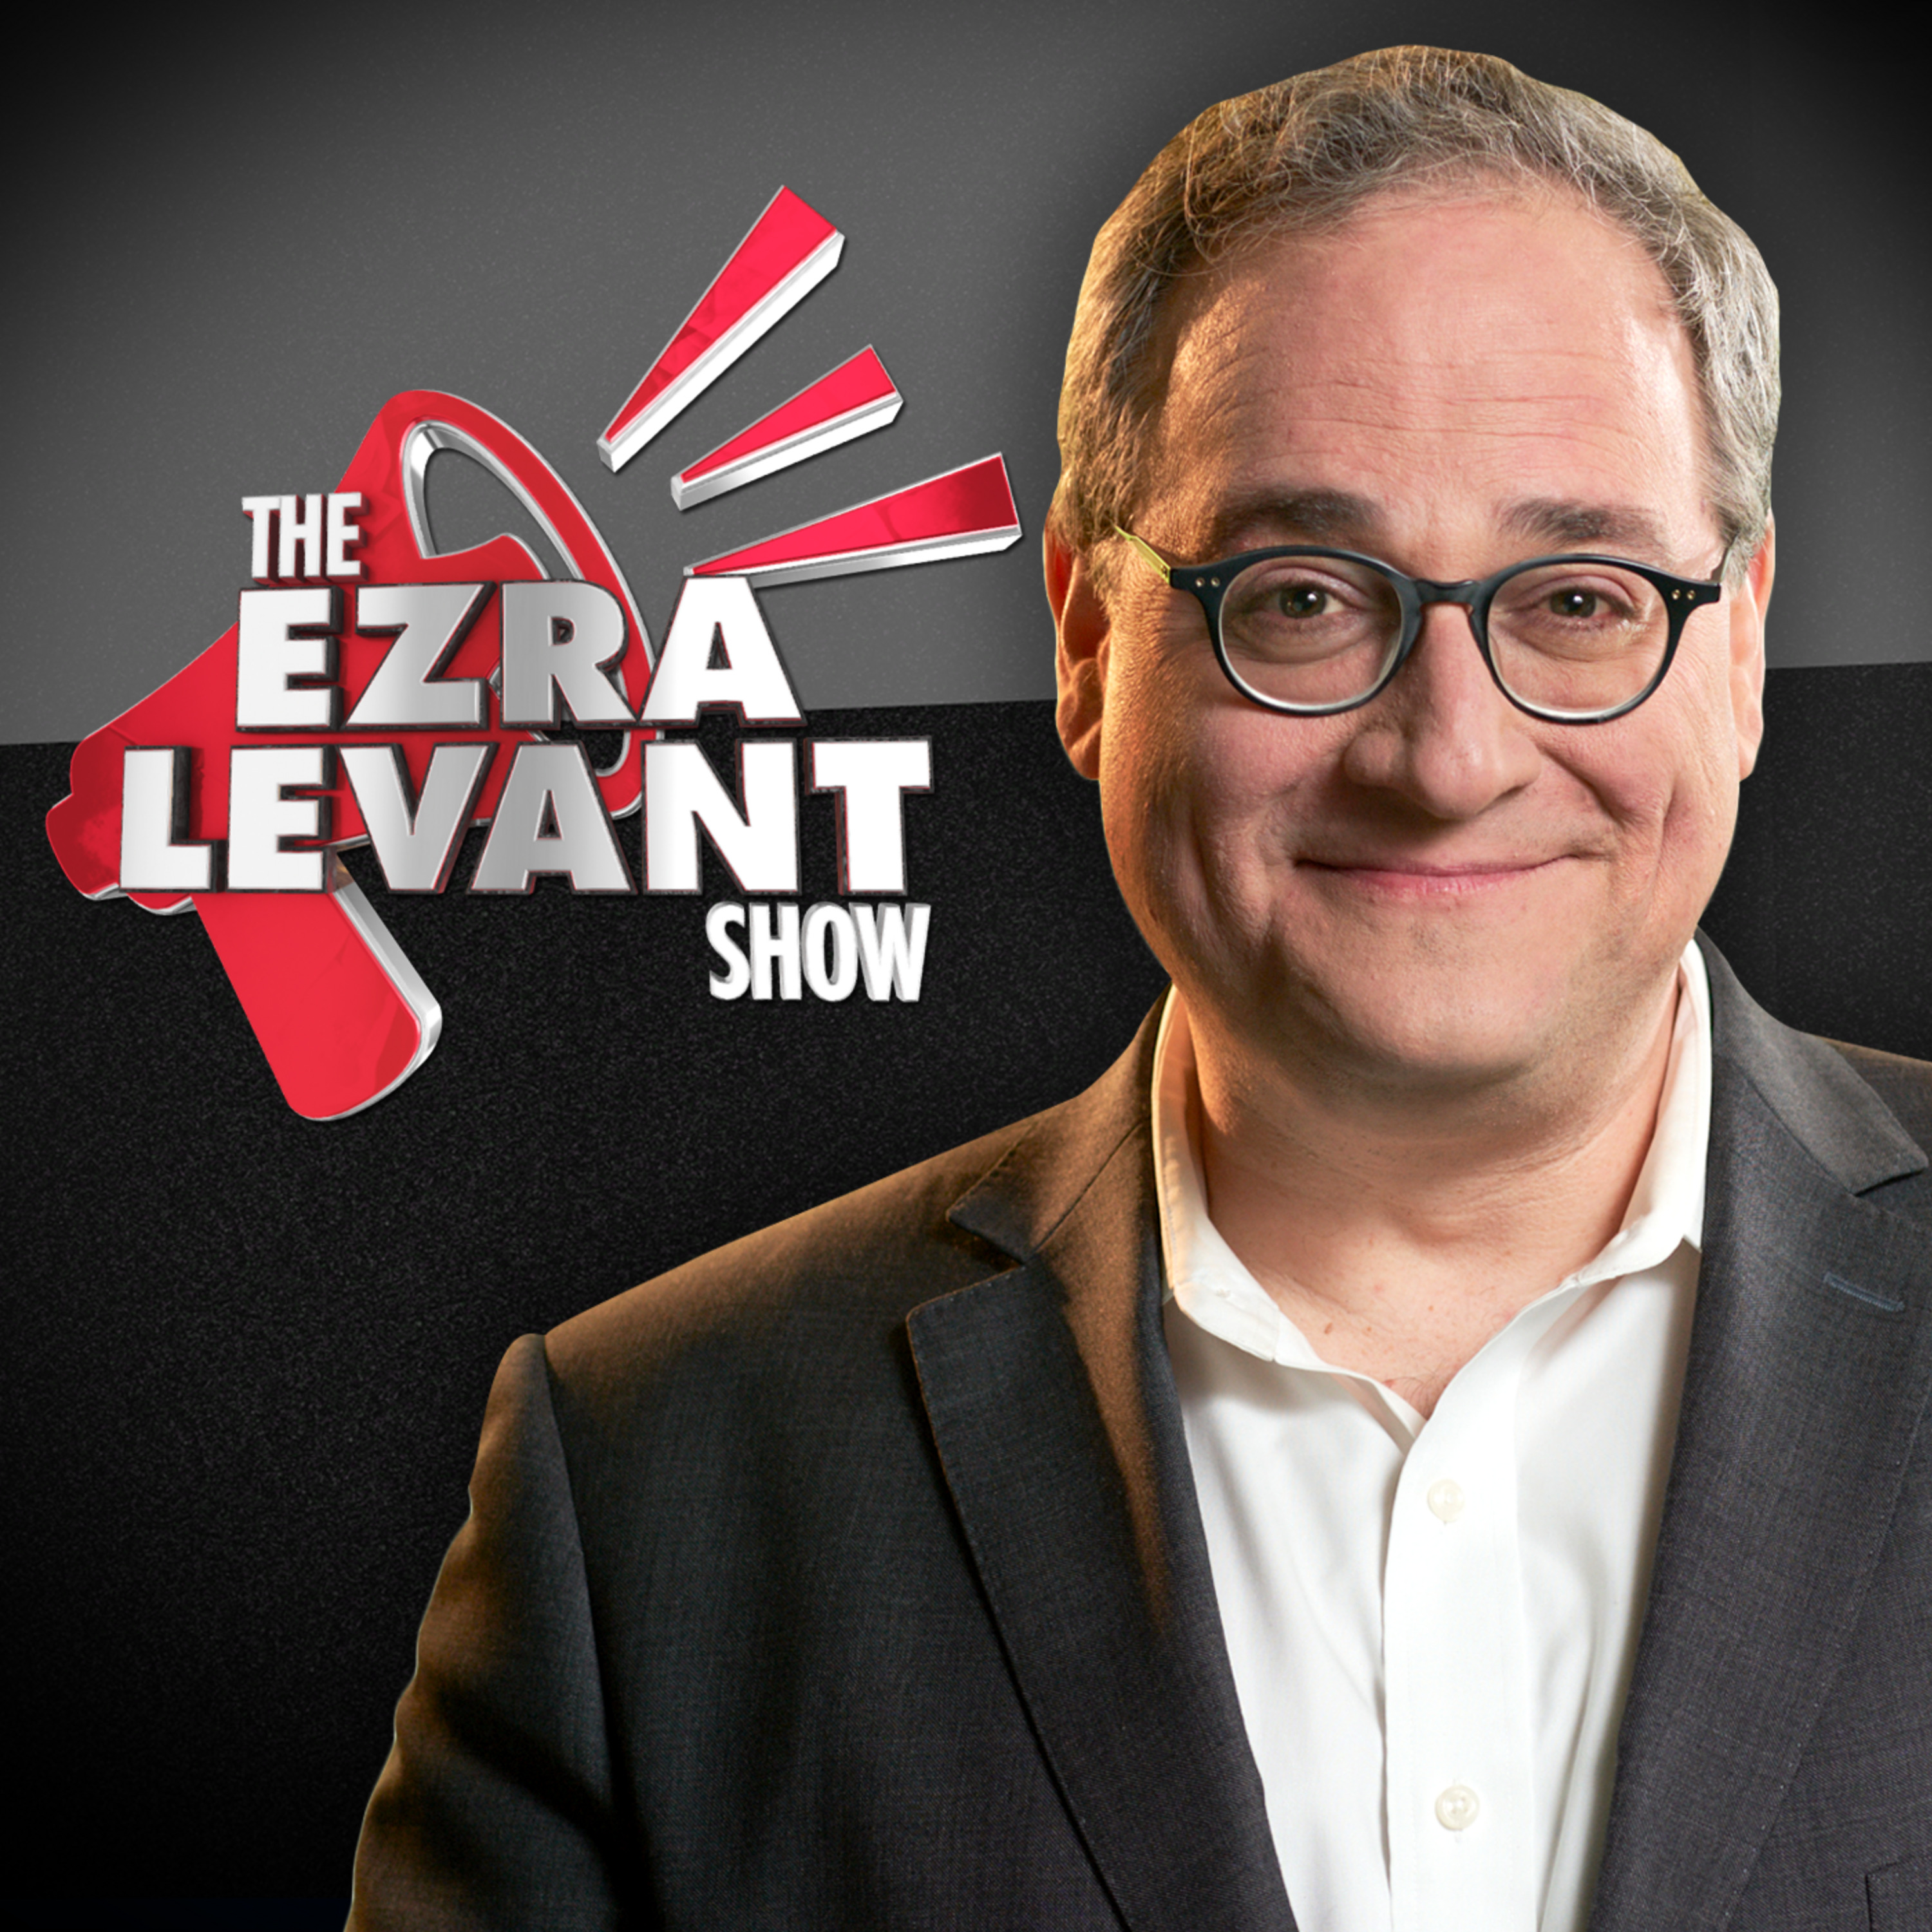 EZRA LEVANT | The state of Canada's media landscape: an in-depth look with Andrew Lawton